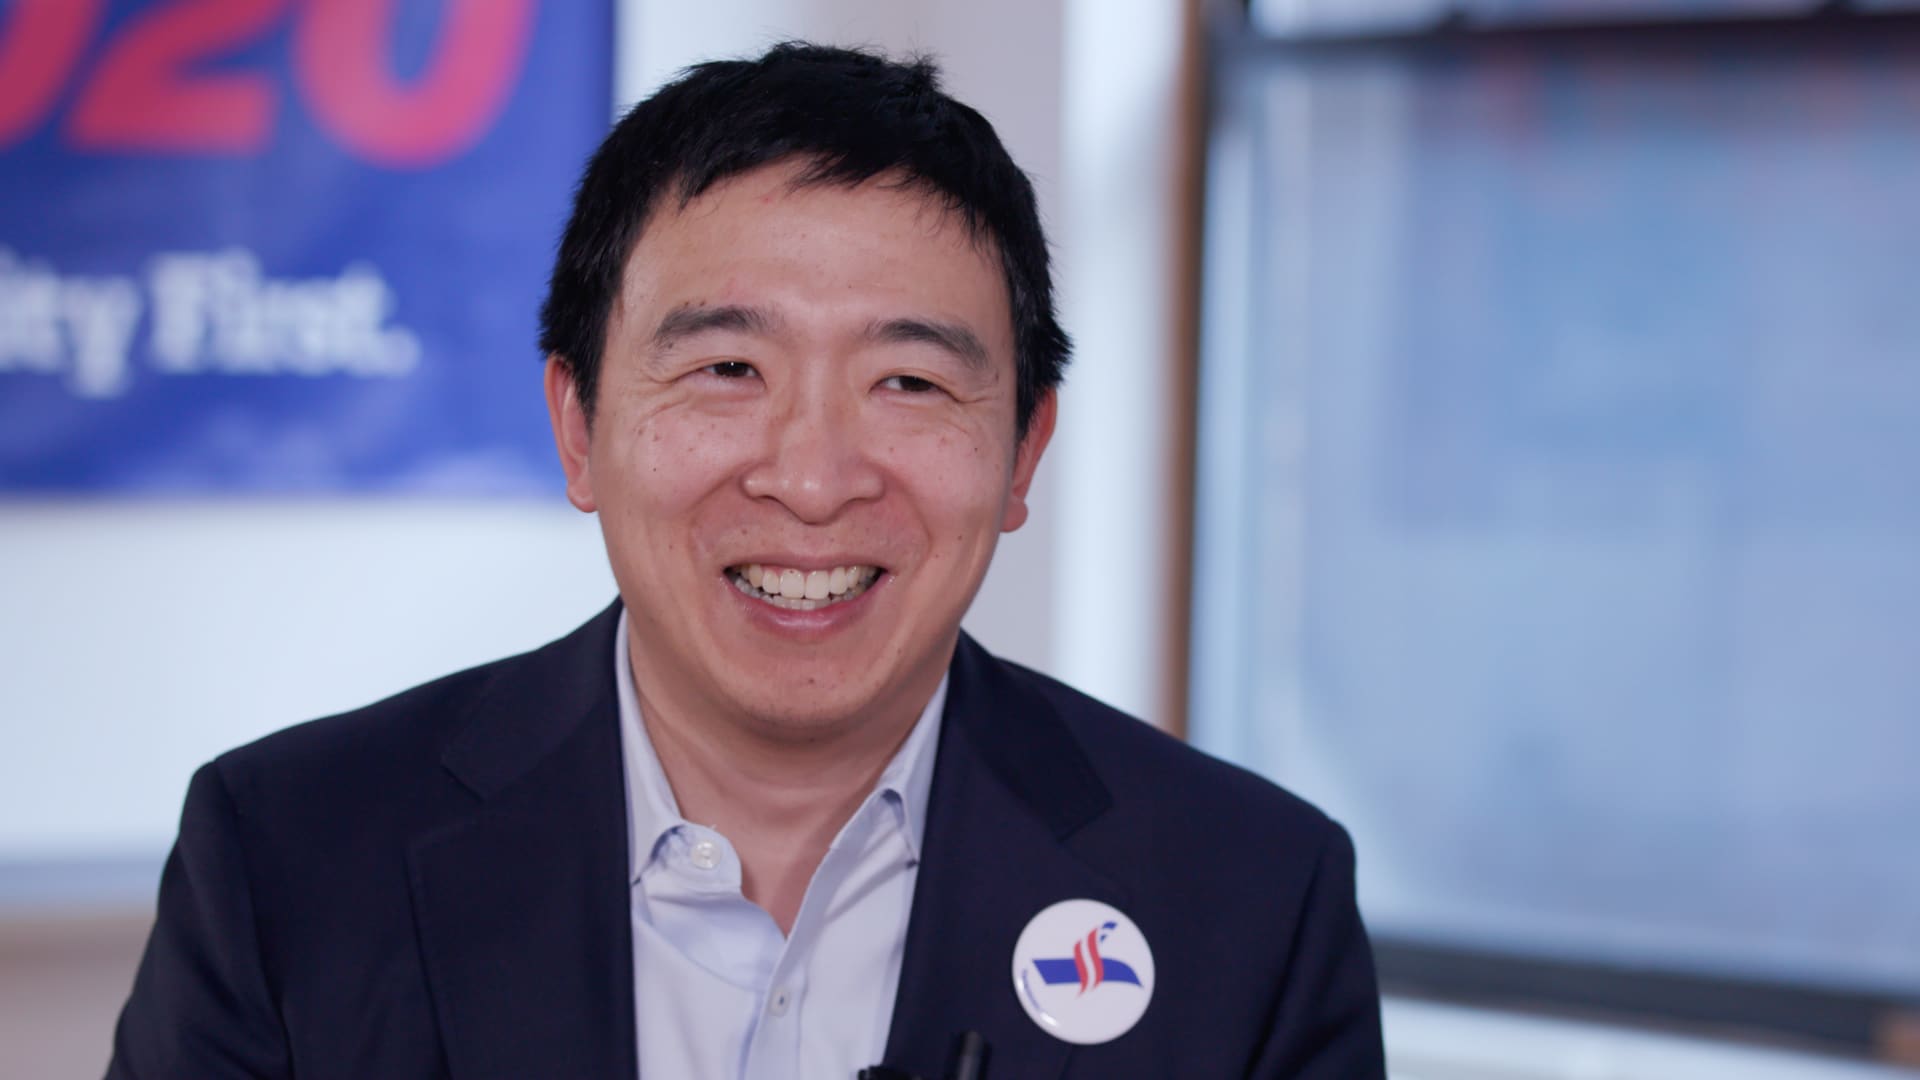 Andrew Yang 2020 Profile - Election Central1920 x 1080